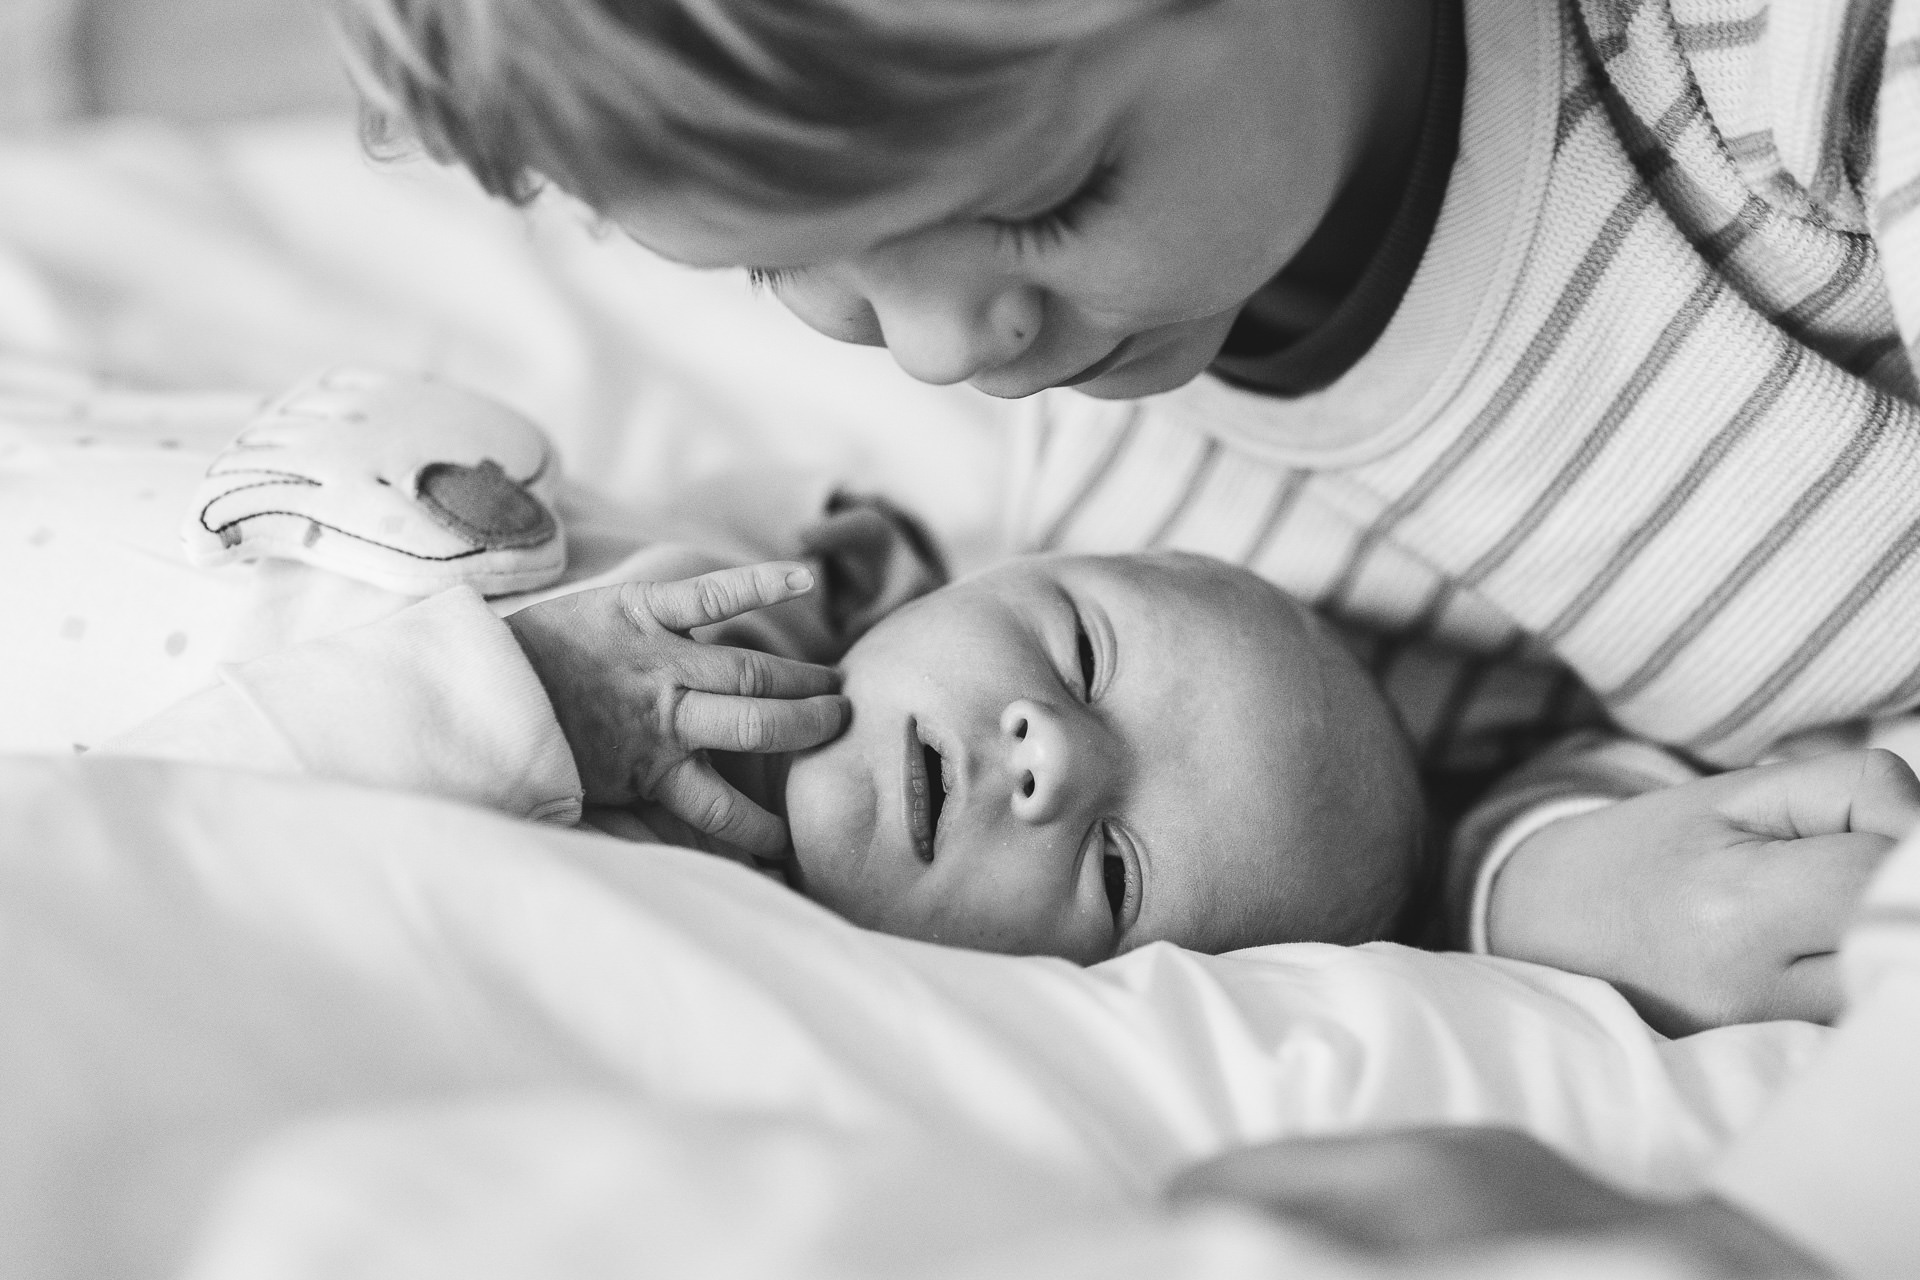 An older brother looking at a newborn baby during a photography session